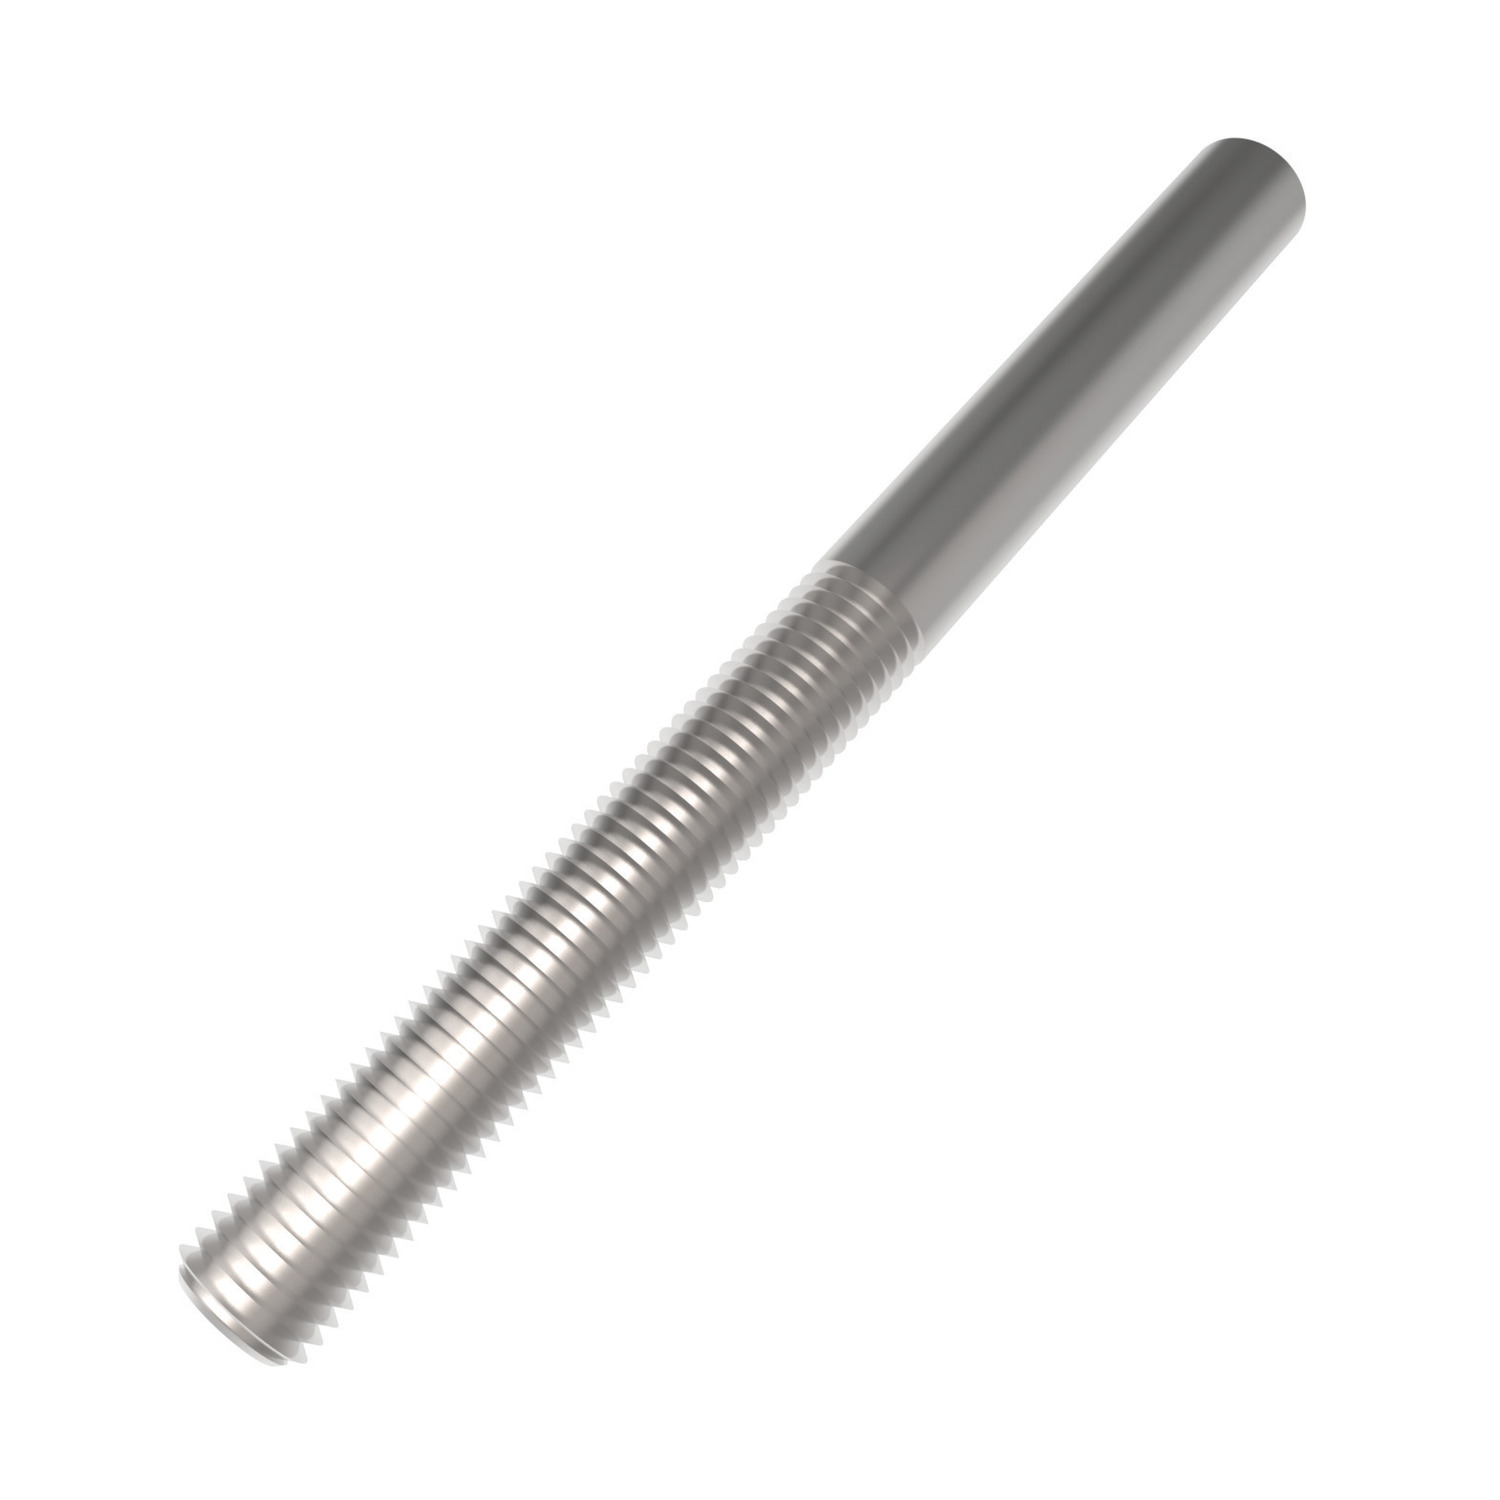 R3866.R024-ZP Welding Studs steel RH M24 Not to be used for lifting unless SWL marked.